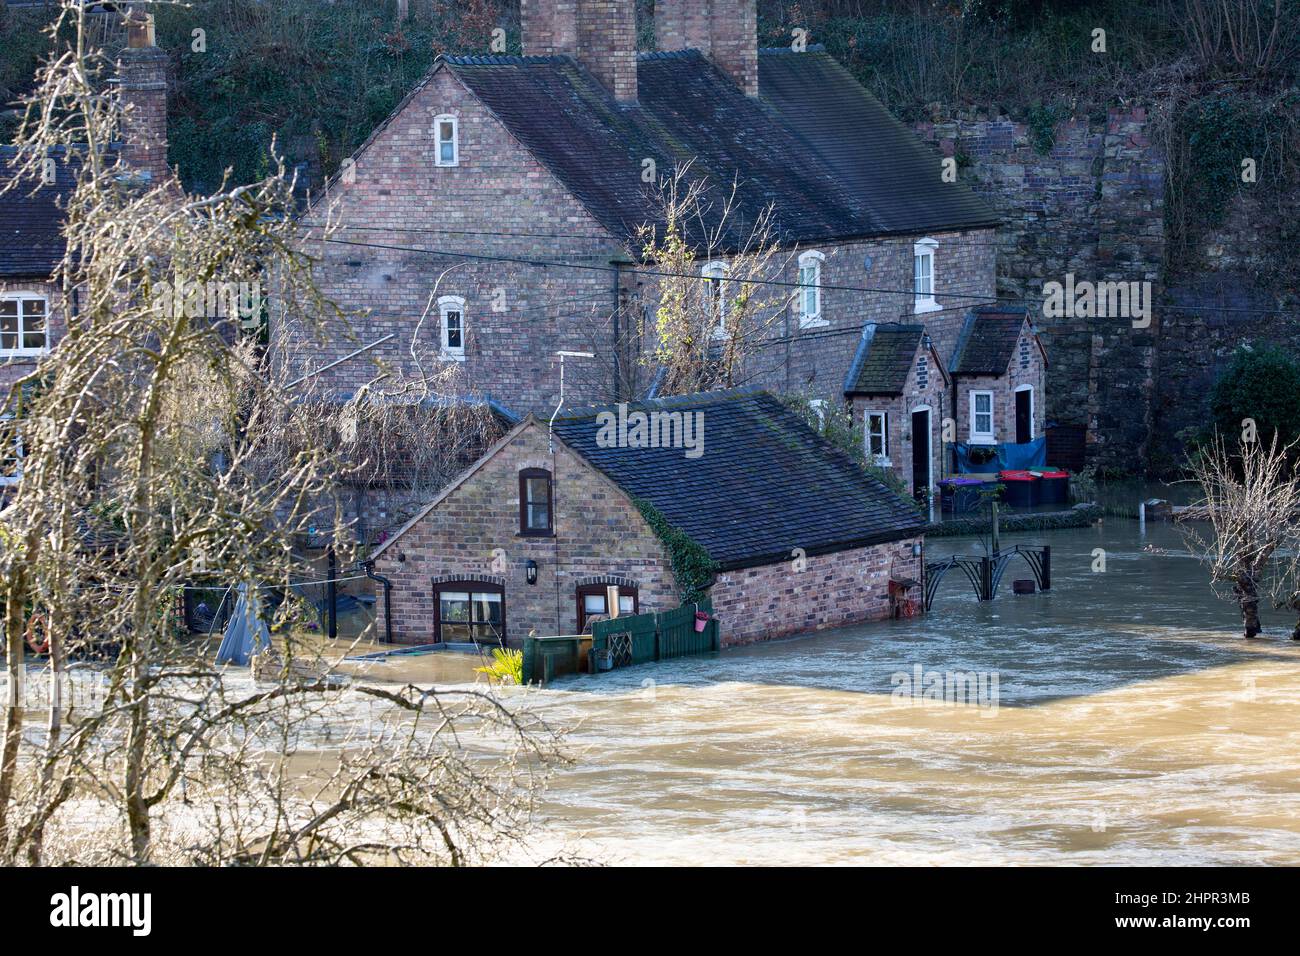 Shropshire, England. 23/02/2022,  Properties along the banks of the River Severn in The Ironbridge Gorge World Heritage Site in Shropshire, England, remain flooded as River Levels continue to remain high following a week of floods. Stock Photo